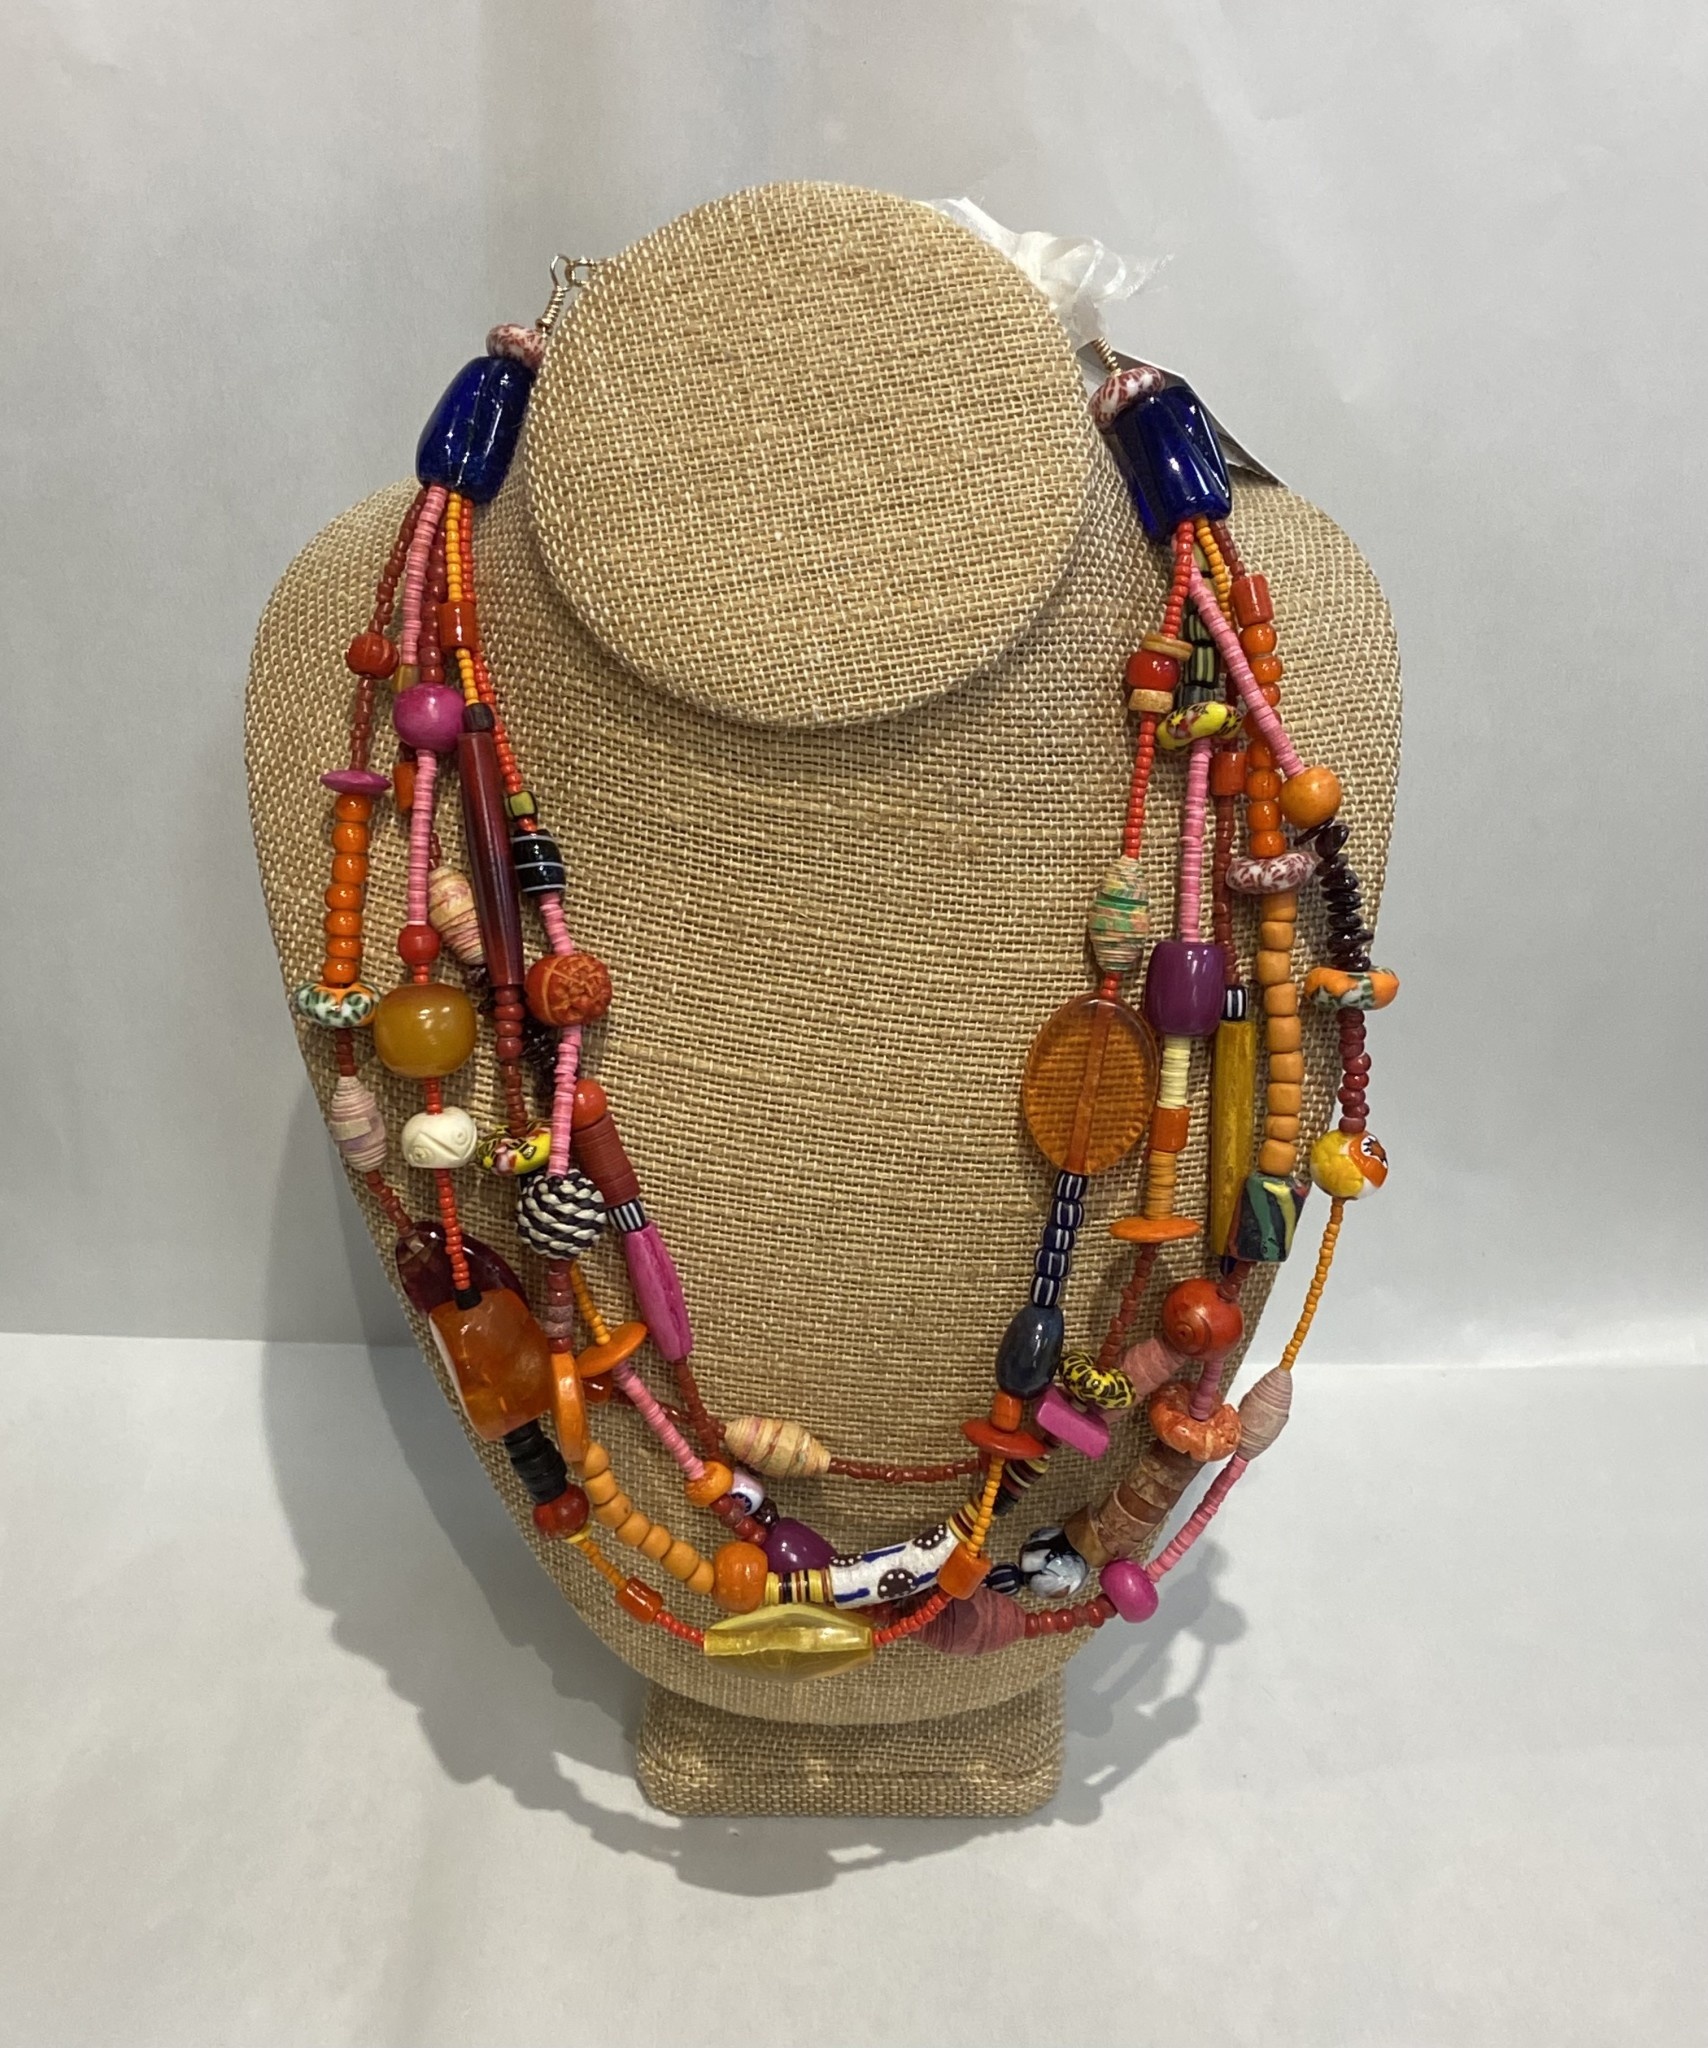 Beverly Creamer BAC13 – Five strand multi-color piece but predominantly in warm peaches, pinks and red, with new African glass trade beads, Murano glass beads, wooden discs and tubes, garnet pebbles, orange white hearts, amber, resin from Paris, woven black and white bea